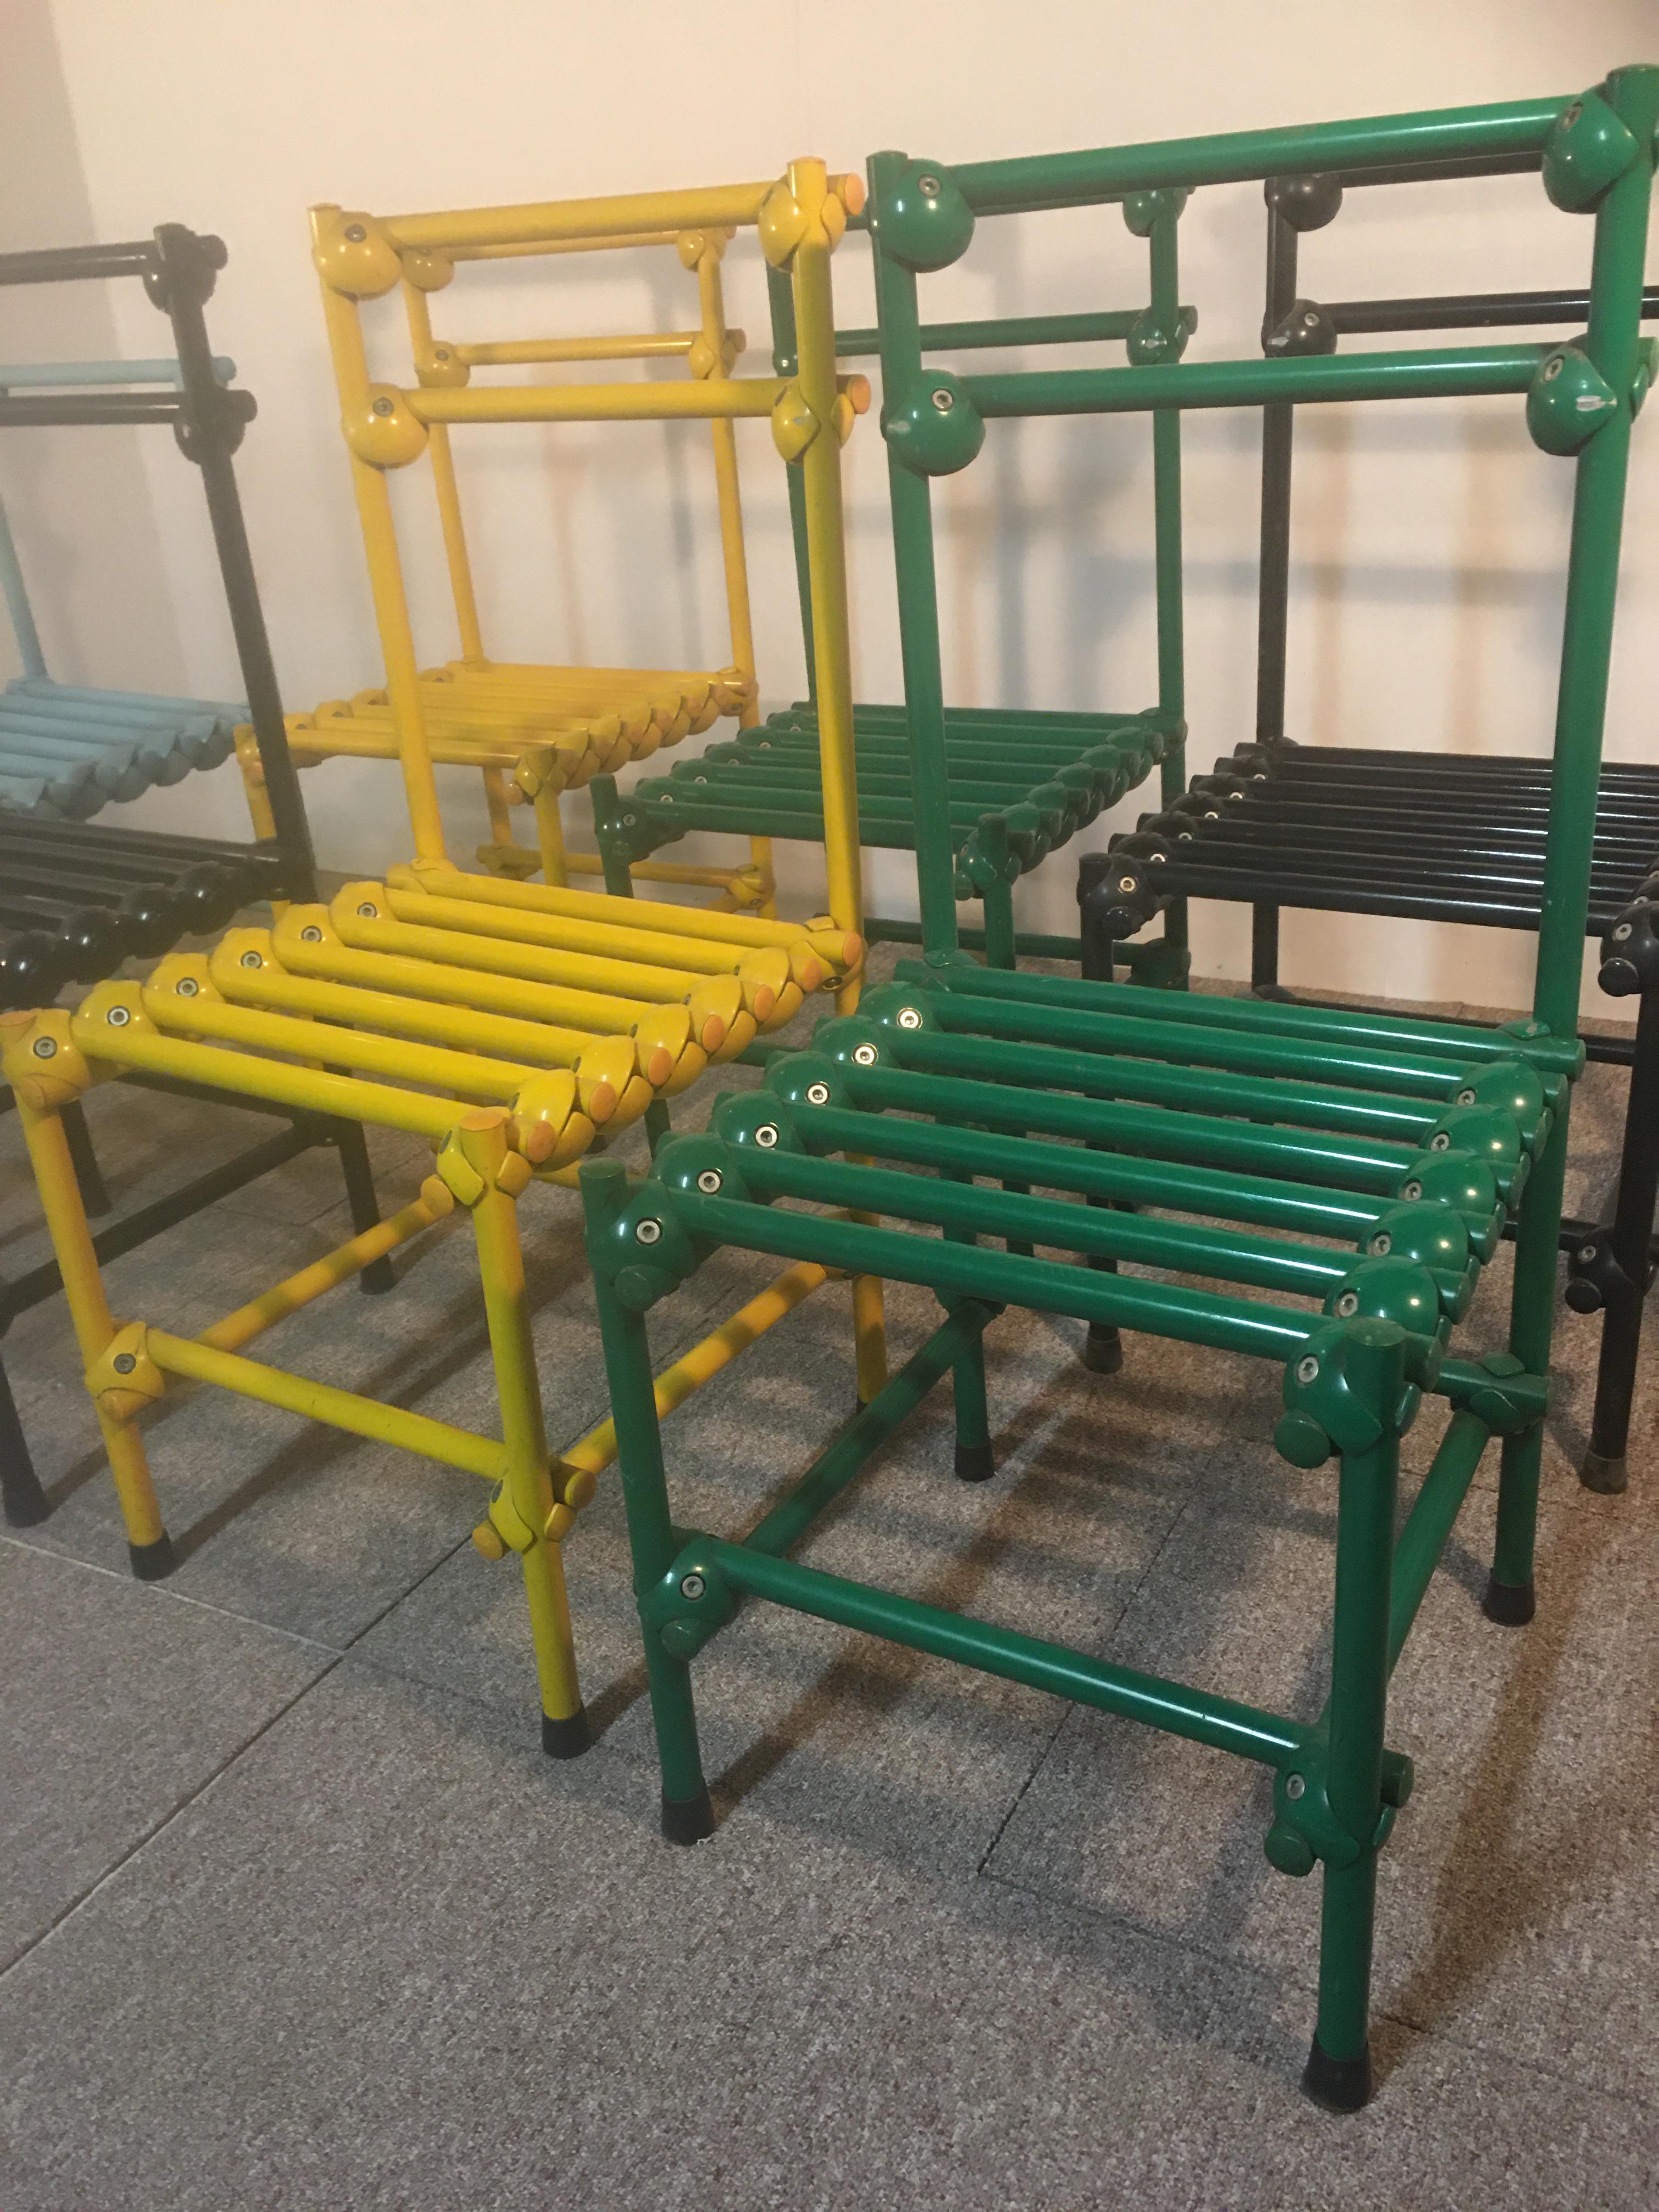 Serie 8 Mecano chairs, color, italy, 80 th.
Chairs made like industrial furniture, that's why they are very original. There is only one cushion model. The chairs are black, light blue, yellow, green.
The chairs are strong, but not perfect.